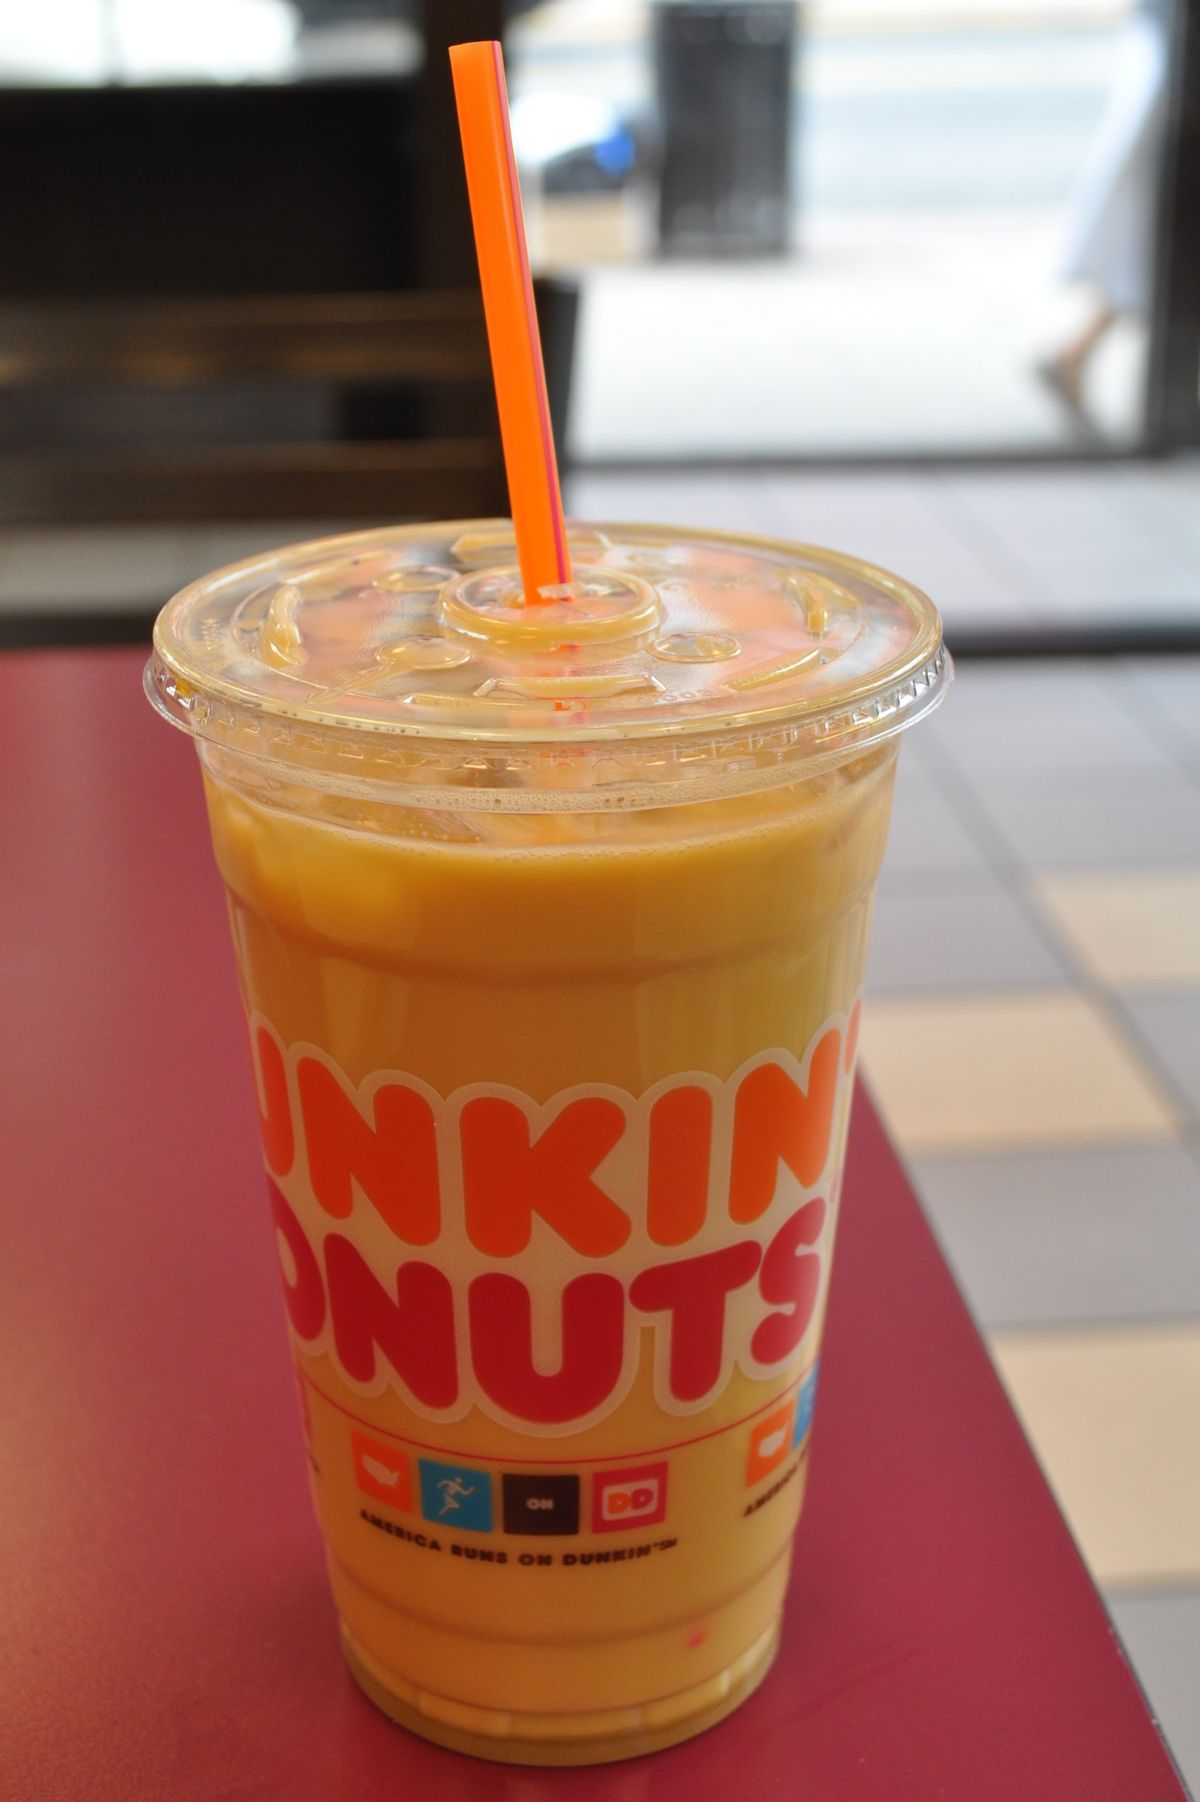 25 Signs You're Addicted To Dunkin' Donuts